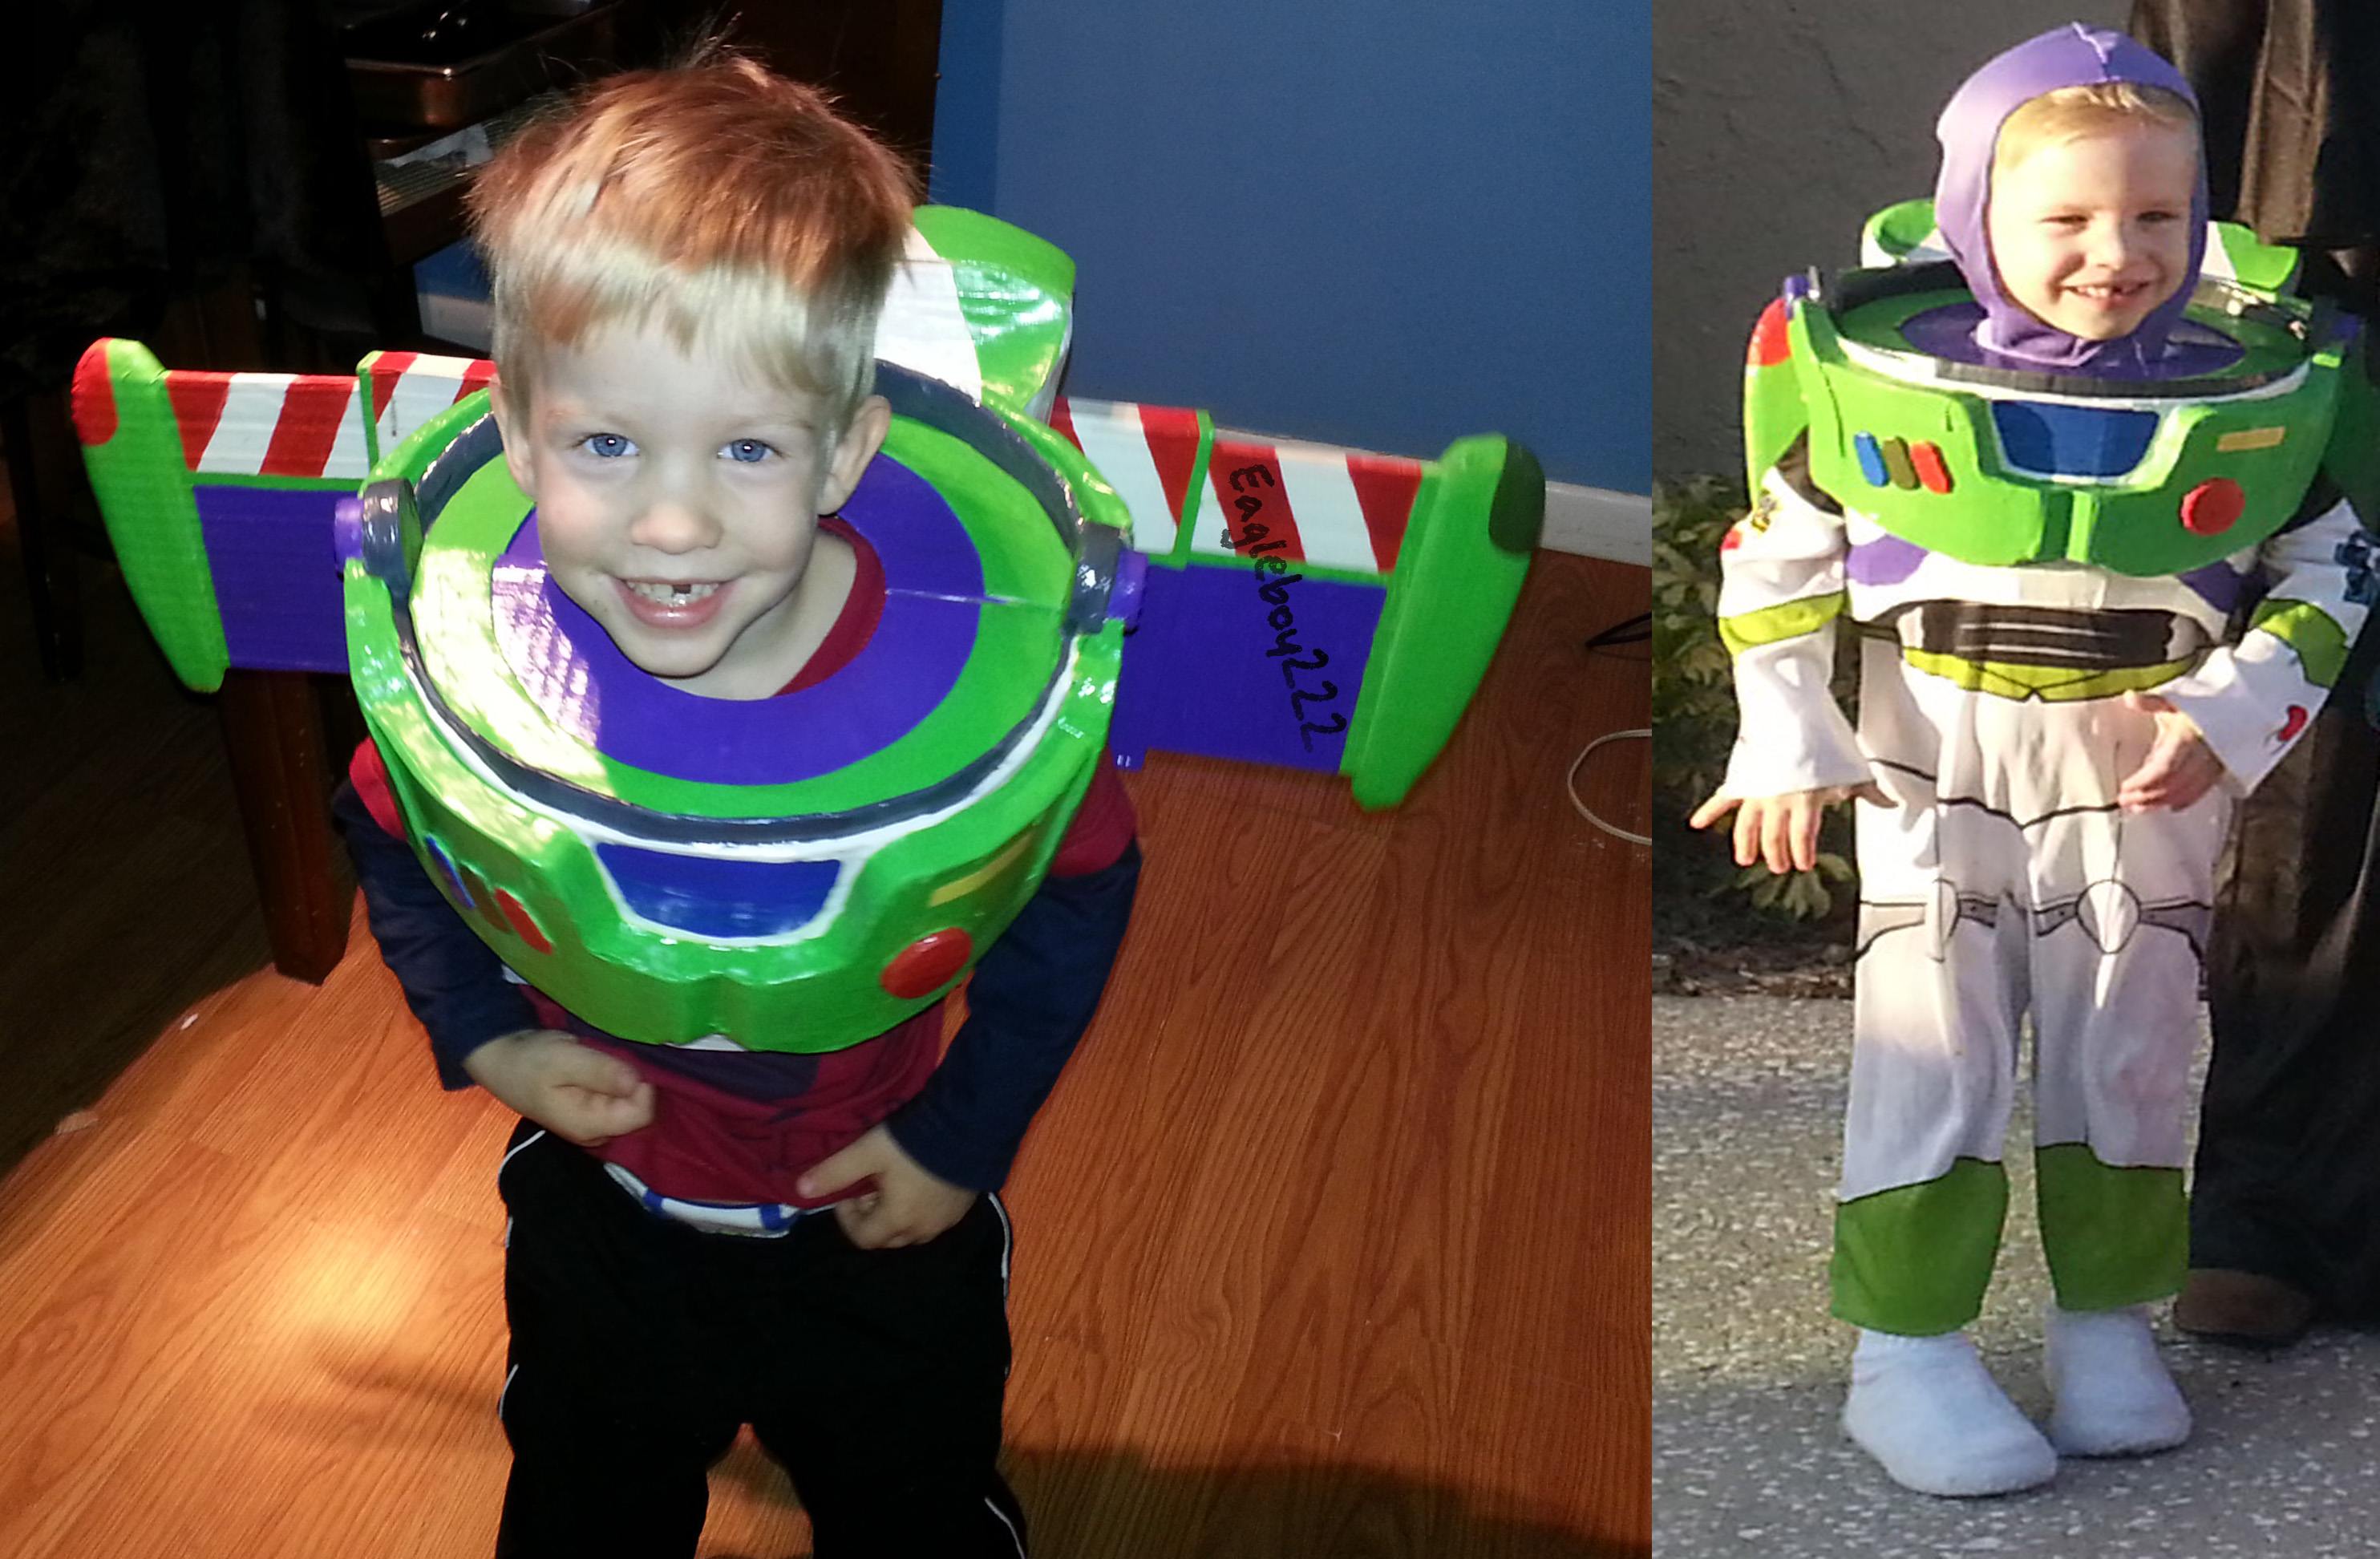 My son's Buzz Lightyear with homemade wings and chest